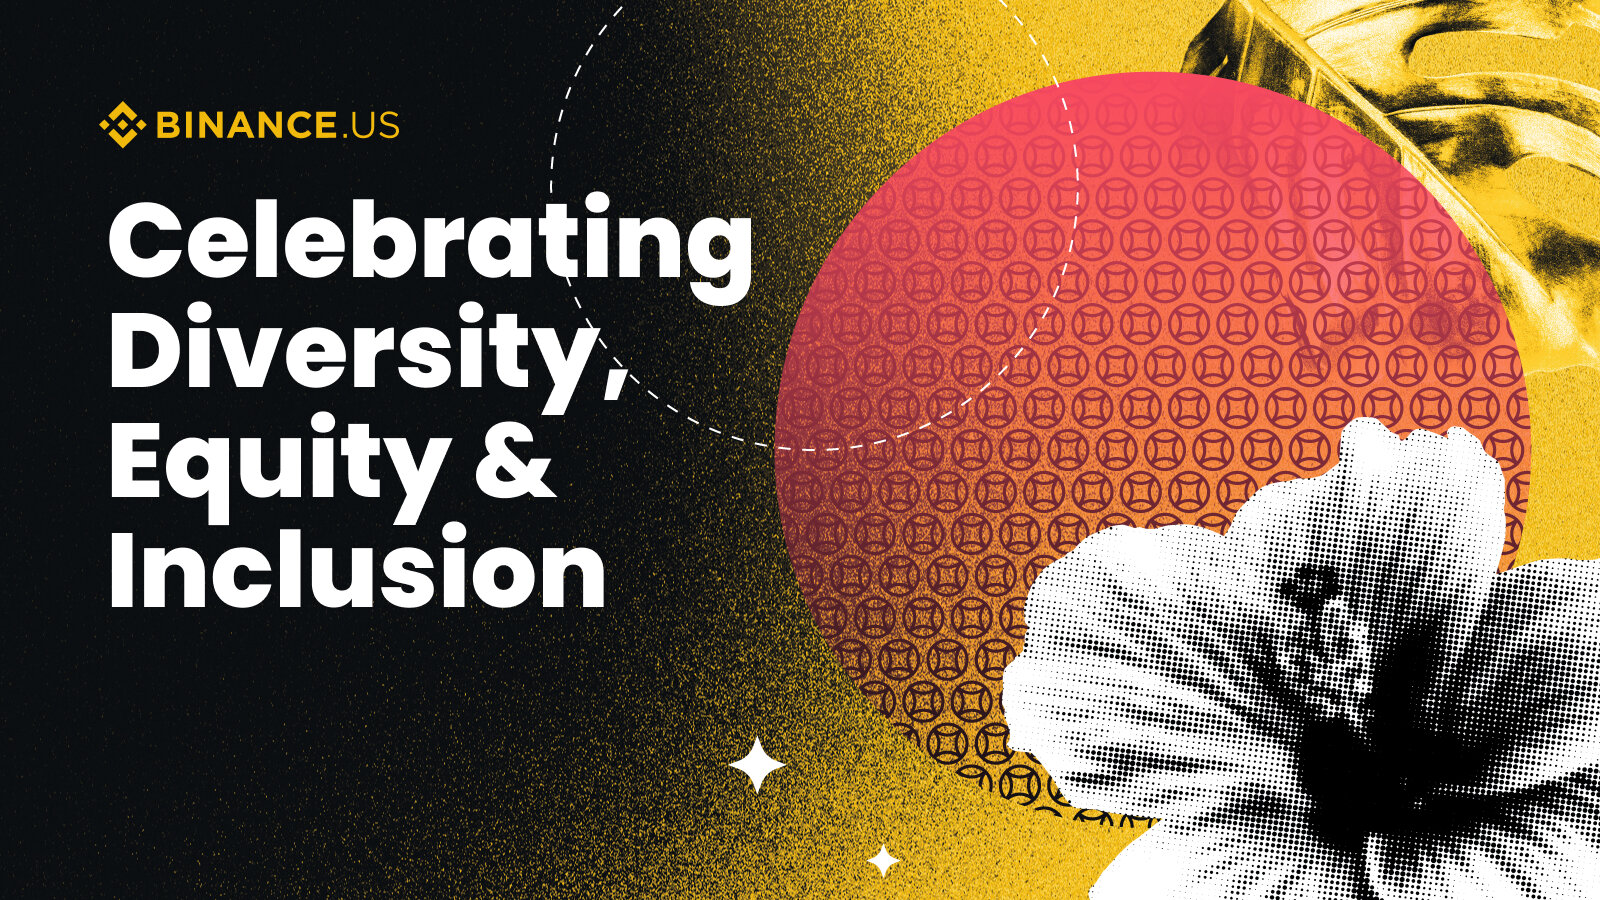 Celebrating Diversity, Equity & Inclusion at Binance.US